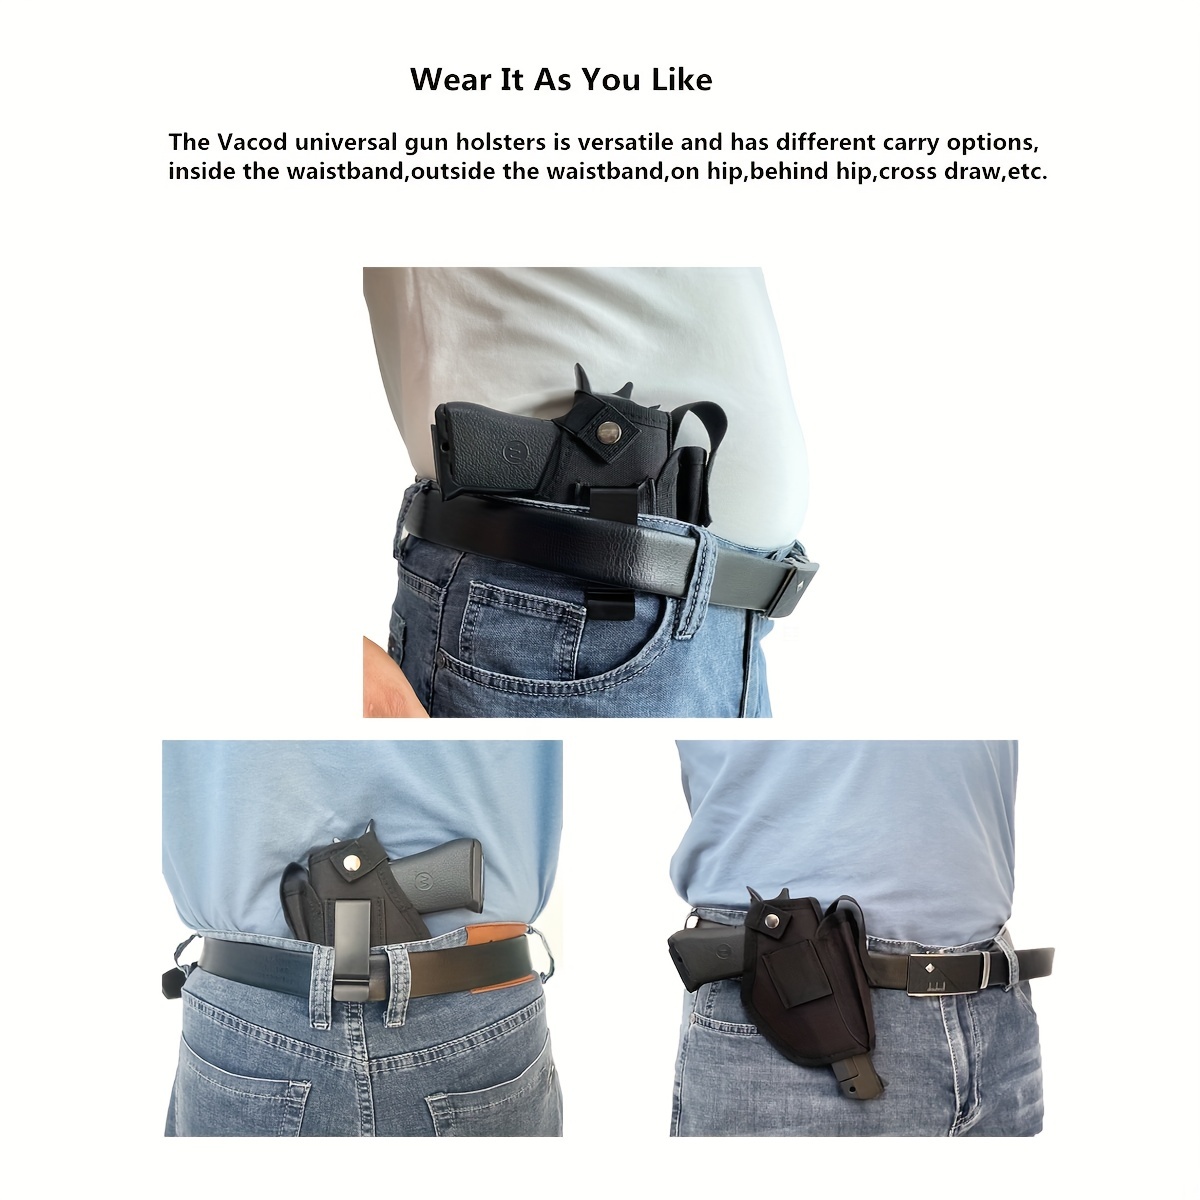  2 Pack Gun Holsters for Concealed Carry, Universal